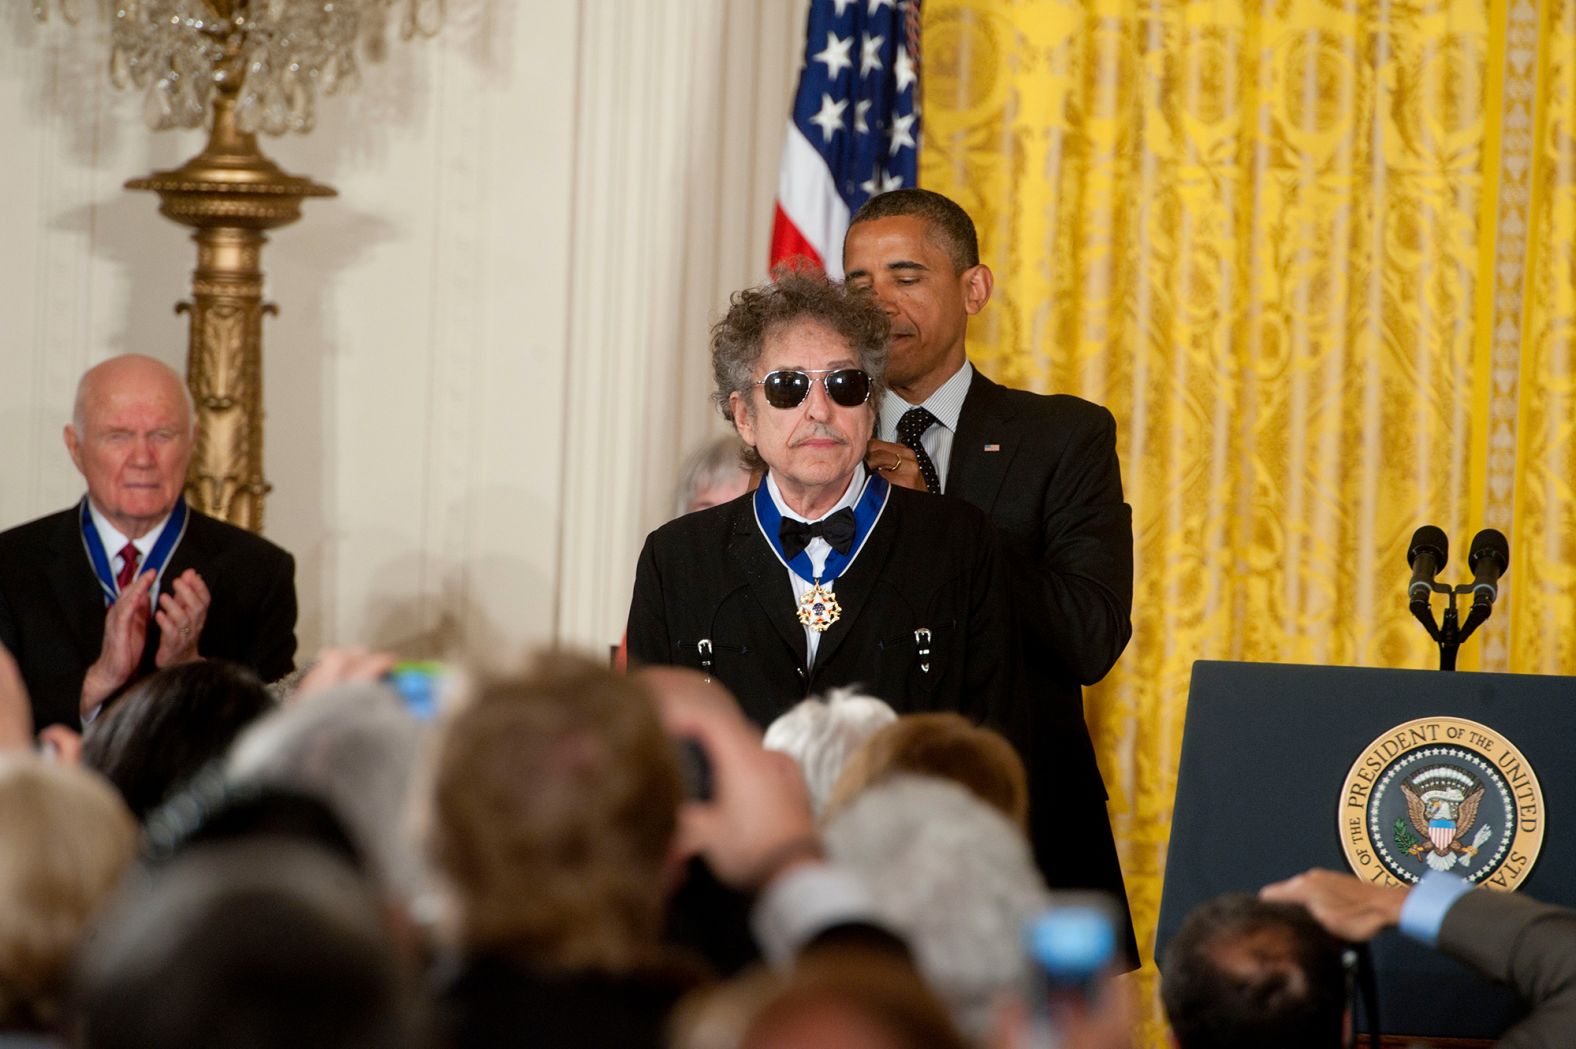 Dylan receives the Presidential Medal of Freedom from President Barack Obama in 2012. "I remember, you know, in college, listening to Bob Dylan and my world opening up, 'cause he captured something about this country that was so vital," Obama said.